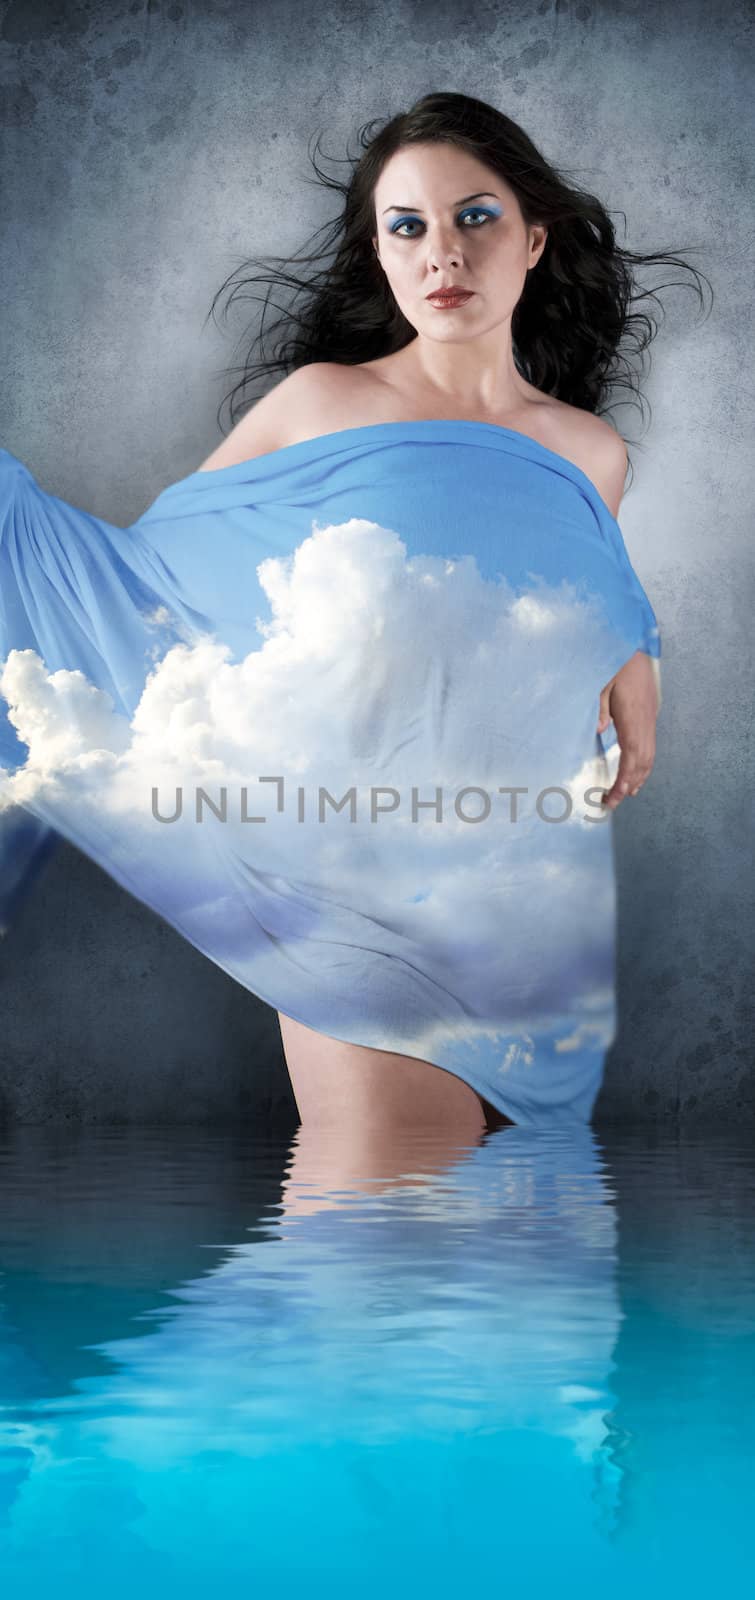 Brunette woman with her head in the clouds with reflection in water